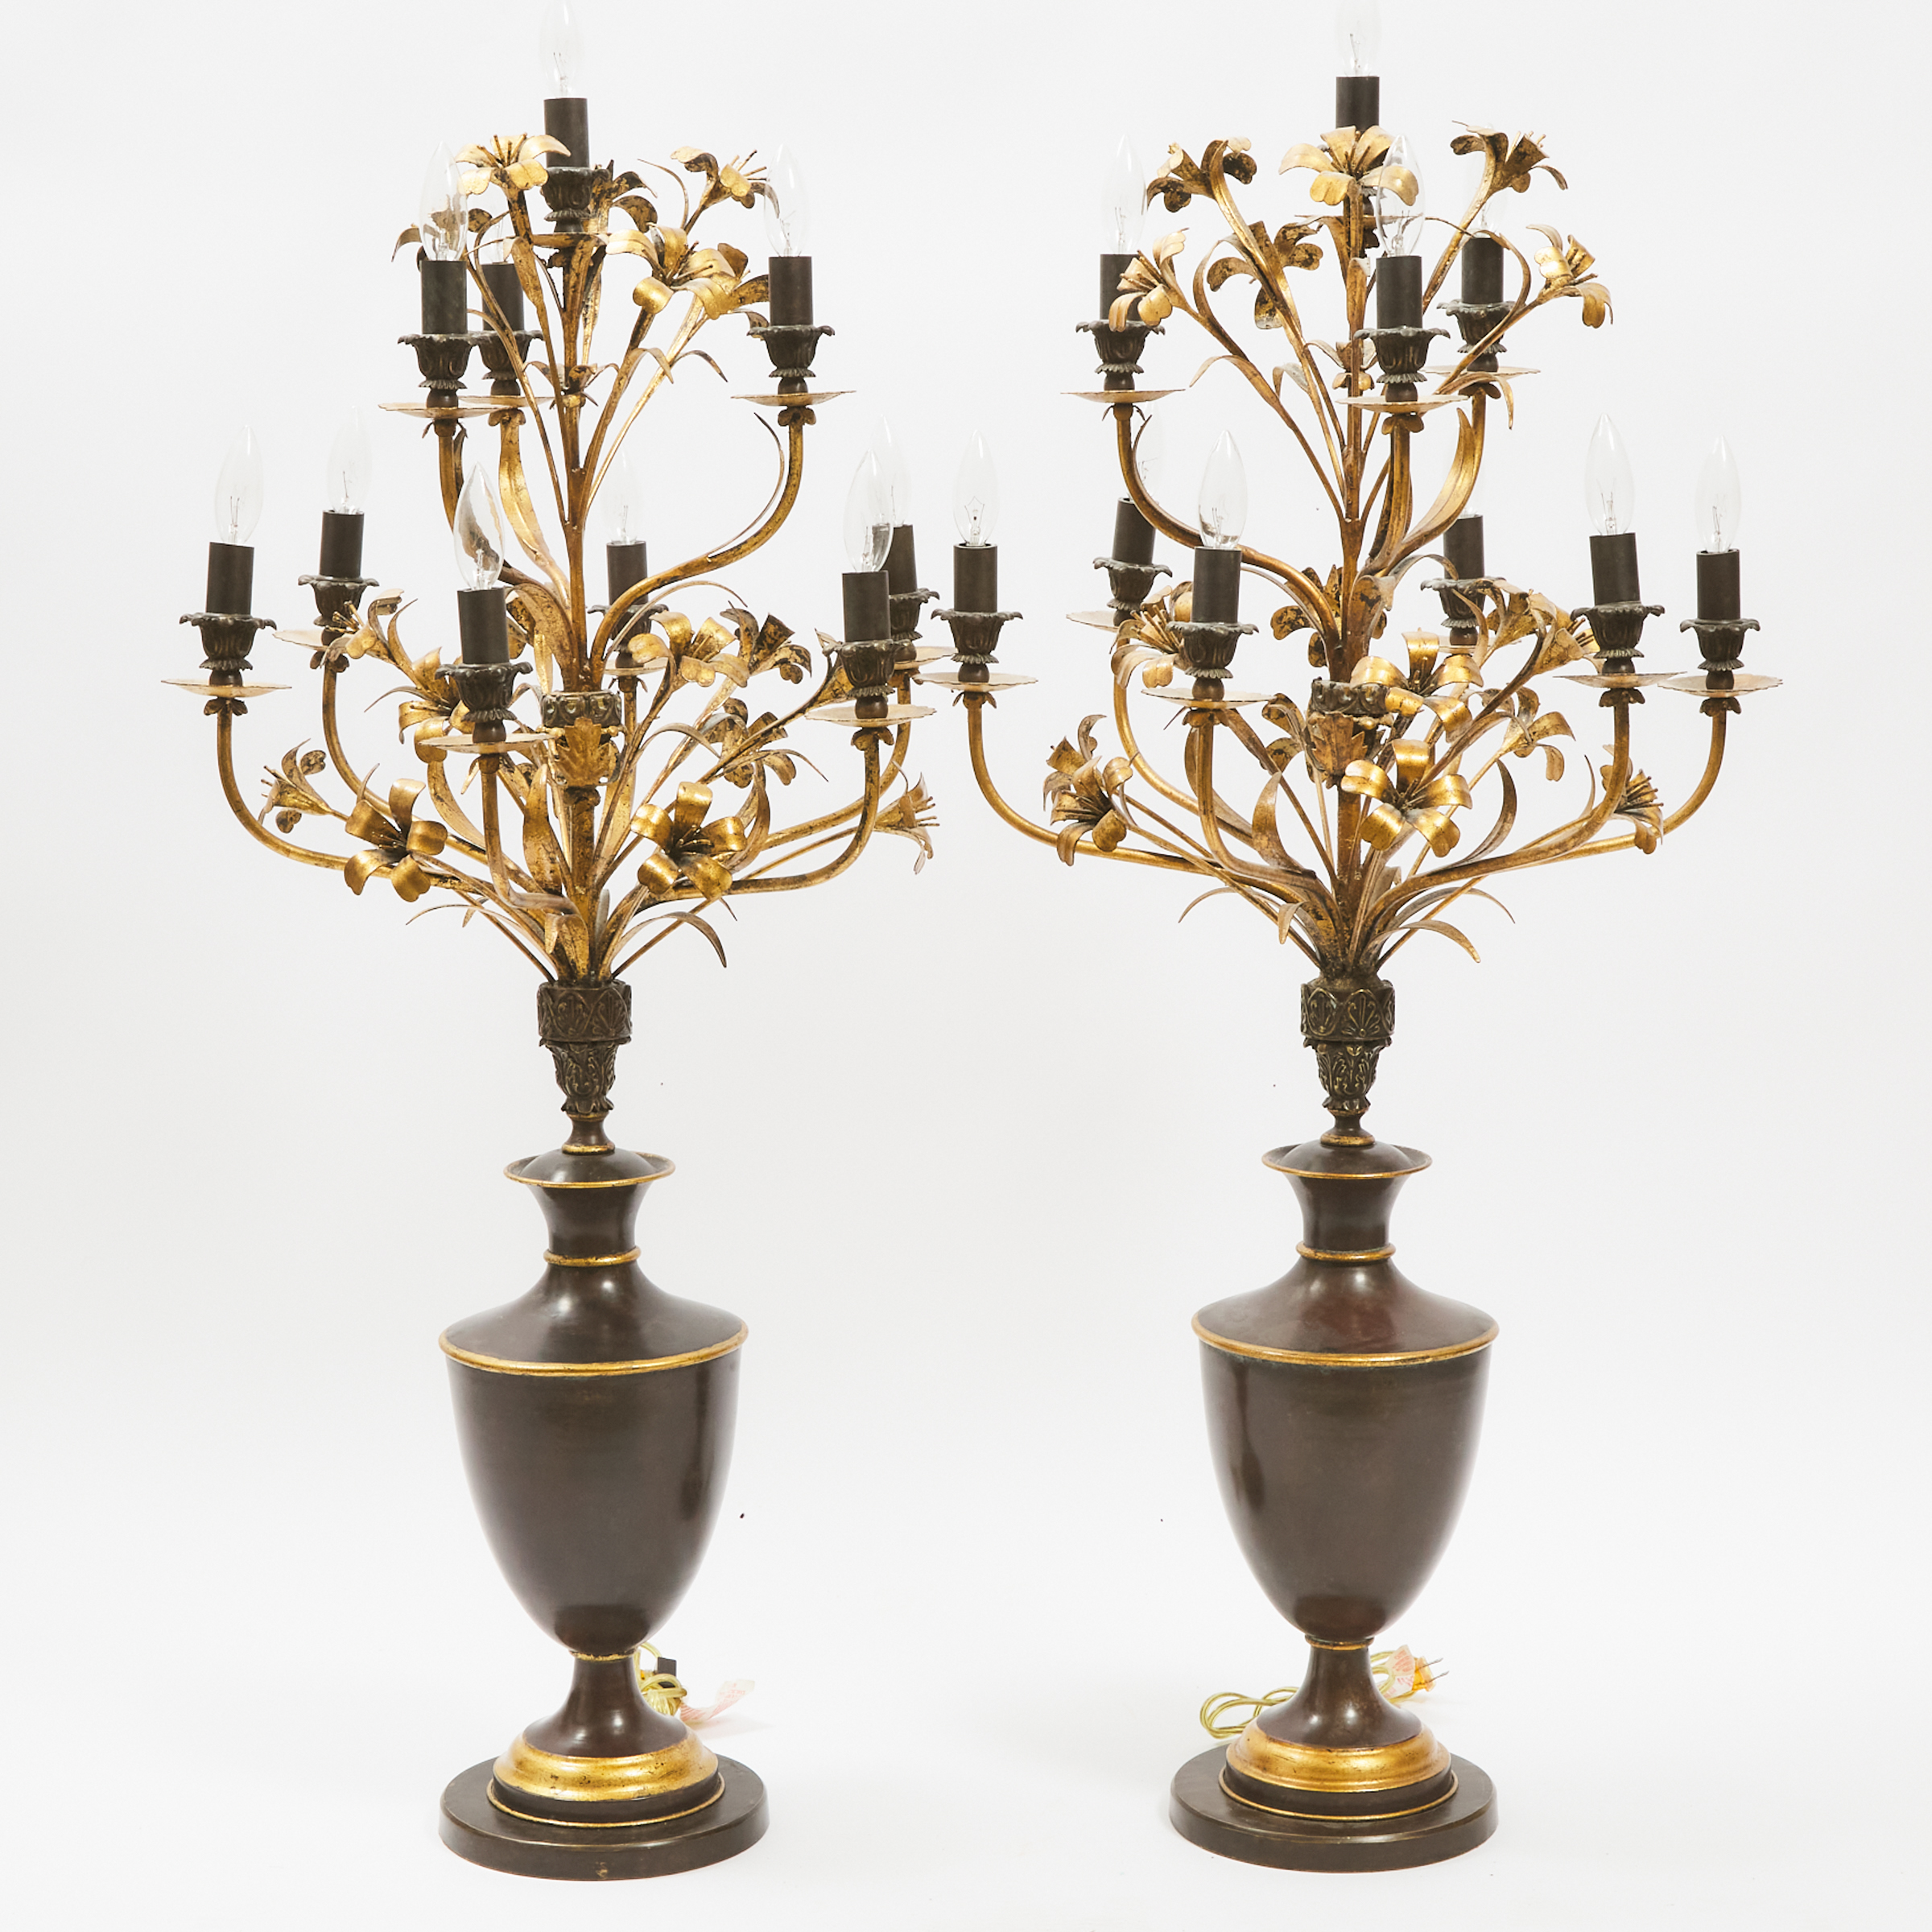 Large Pair of Contemporary French Gilt and Patinated Bronze Banquet Candelabras